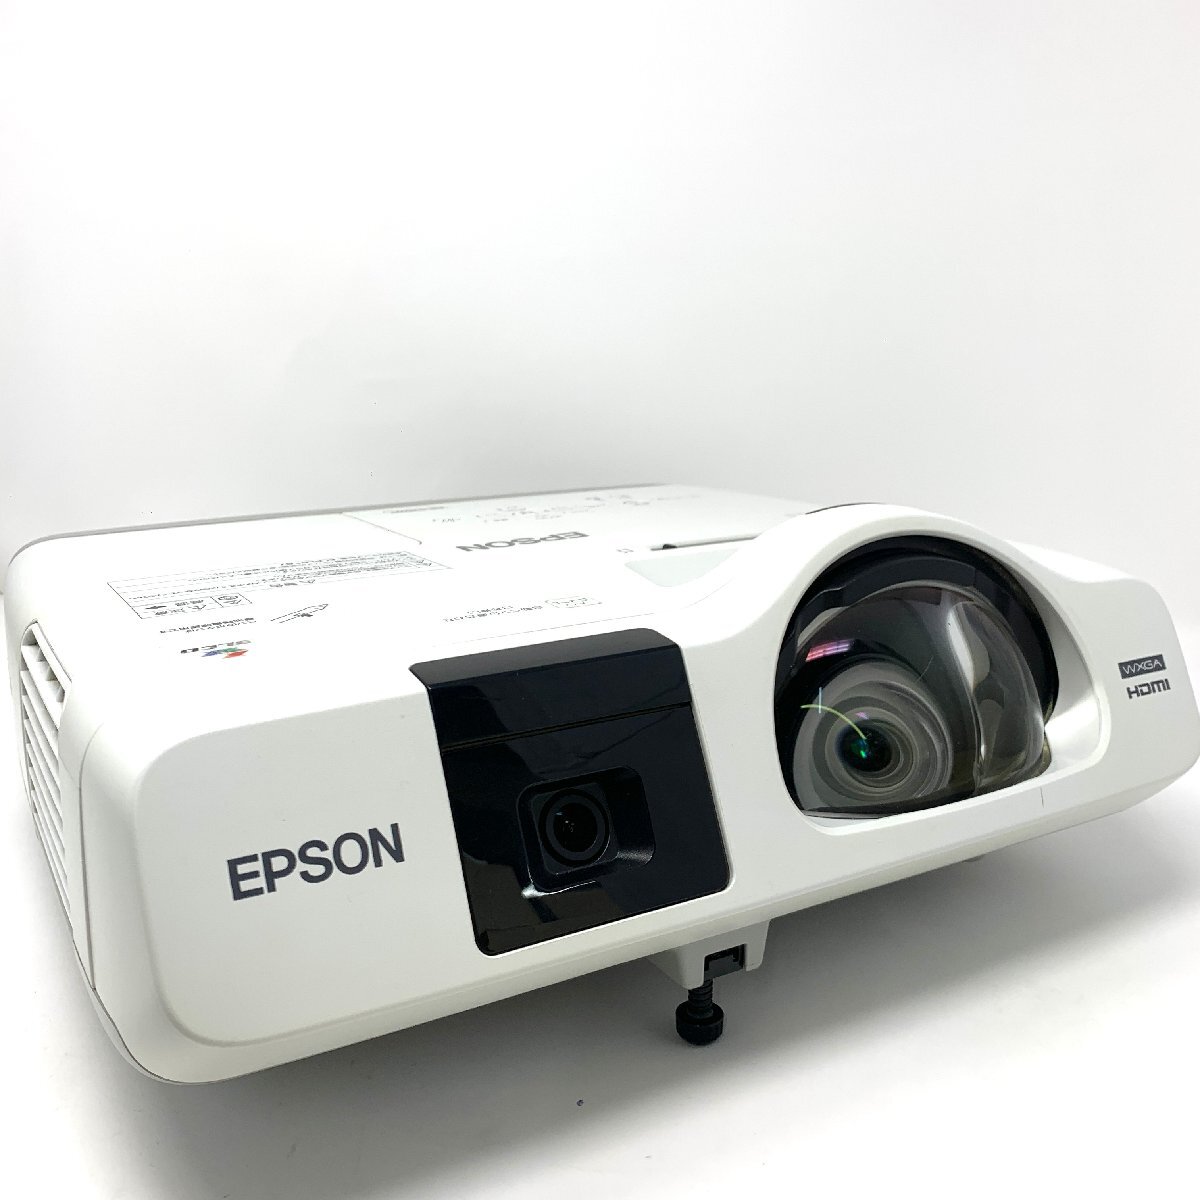 [ height adjustment for pair / lens cover lack of ] lamp 829 hour EB-536WT EPSON projector 3400lm WXGA HDMI 3LCD/0113